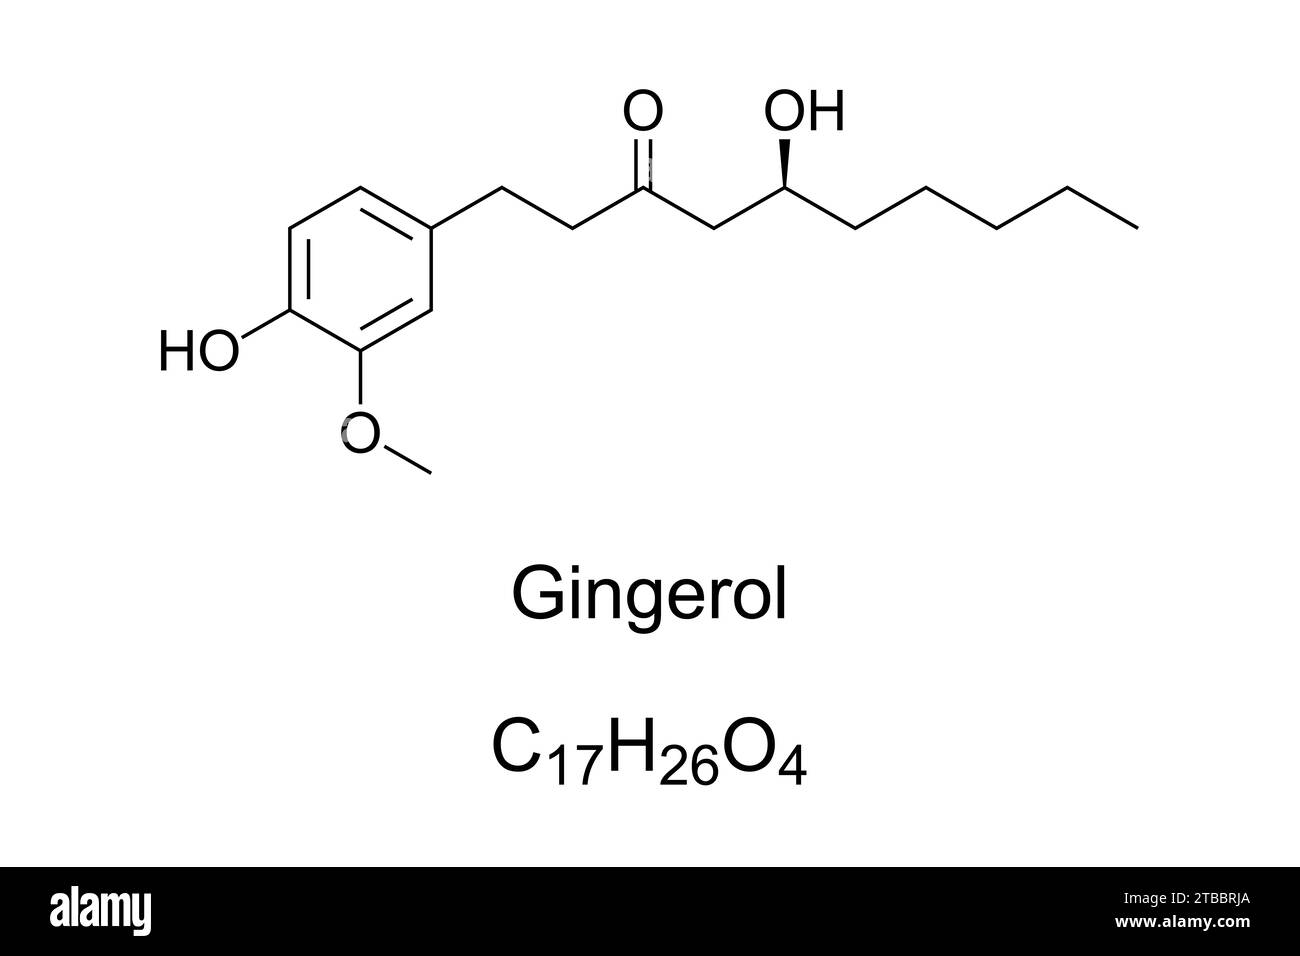 Gingerol, chemical formula and structure. Phenolic phytochemical compound found in fresh ginger, activating heat receptors on the tongue. Stock Photo